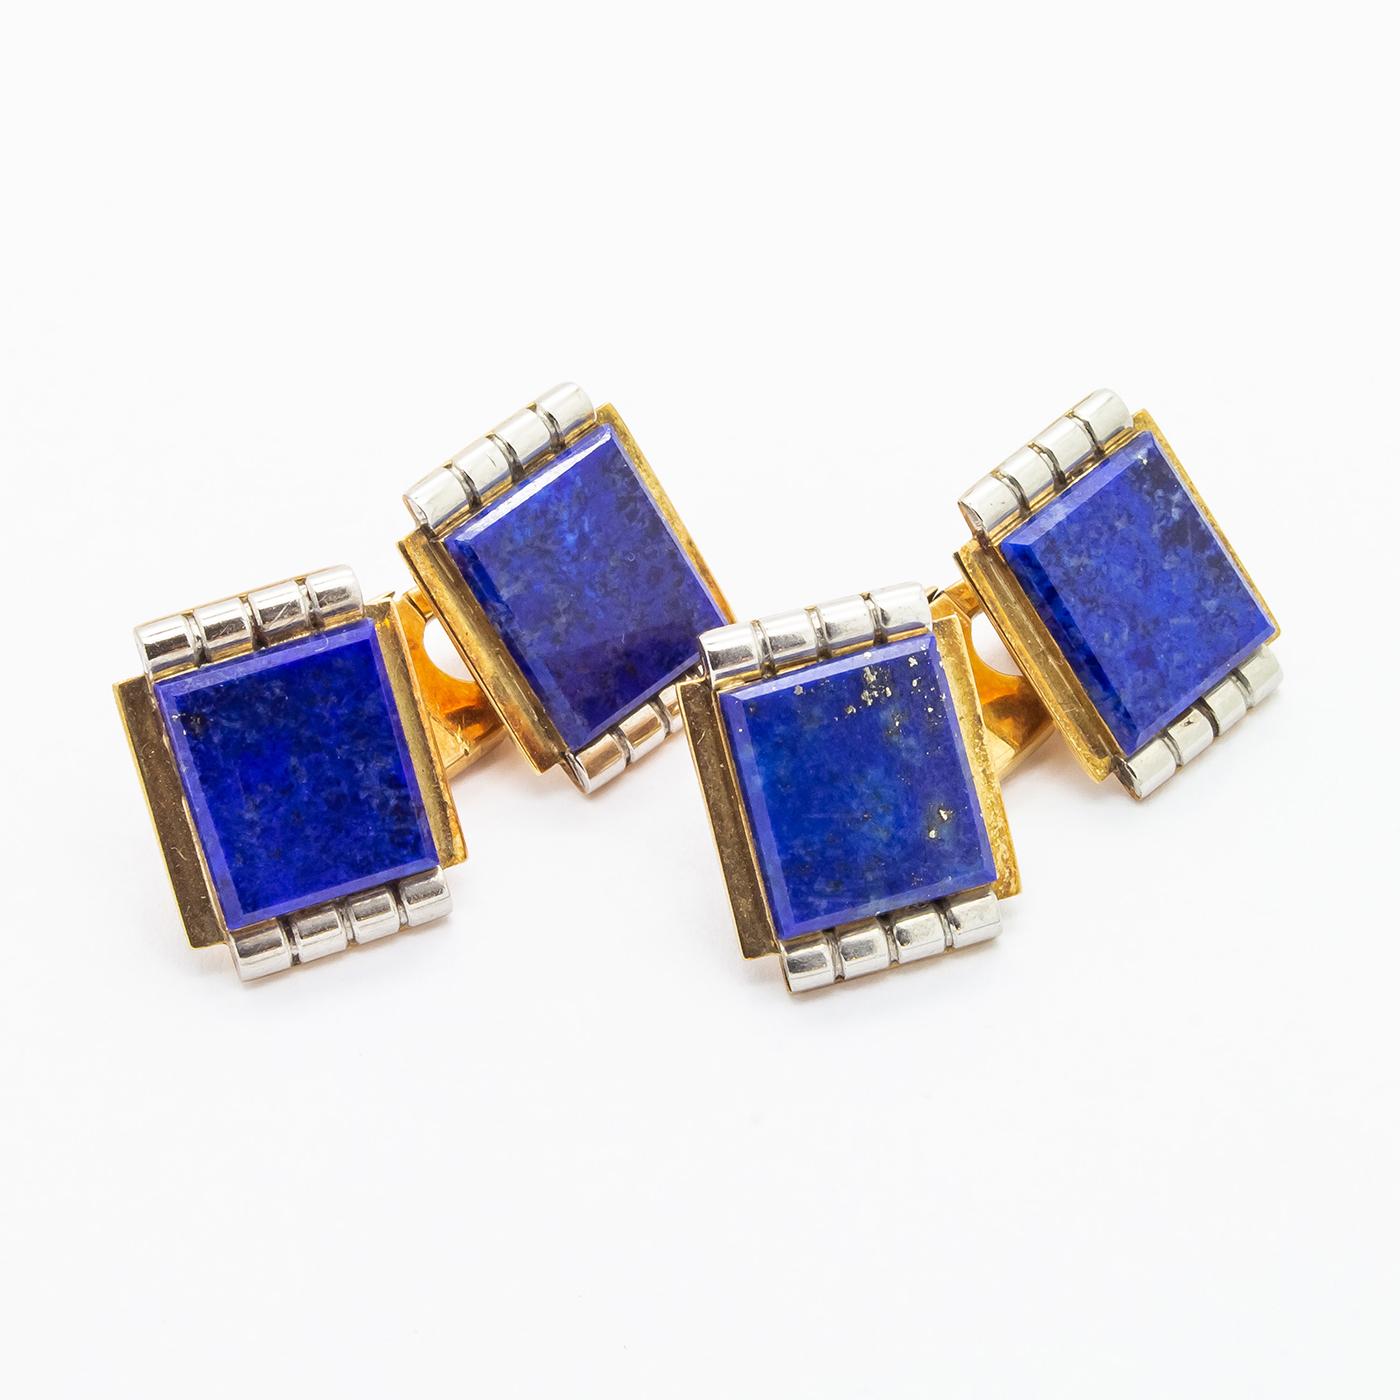 A pair of Art Deco, lapis lazuli and gold cufflinks, each set with flat, rectangular lapis lazuli, on yellow gold plates, with white gold bars at each end, divided into four, mounted in 14ct gold, with marks for Poland, with chain link fittings,